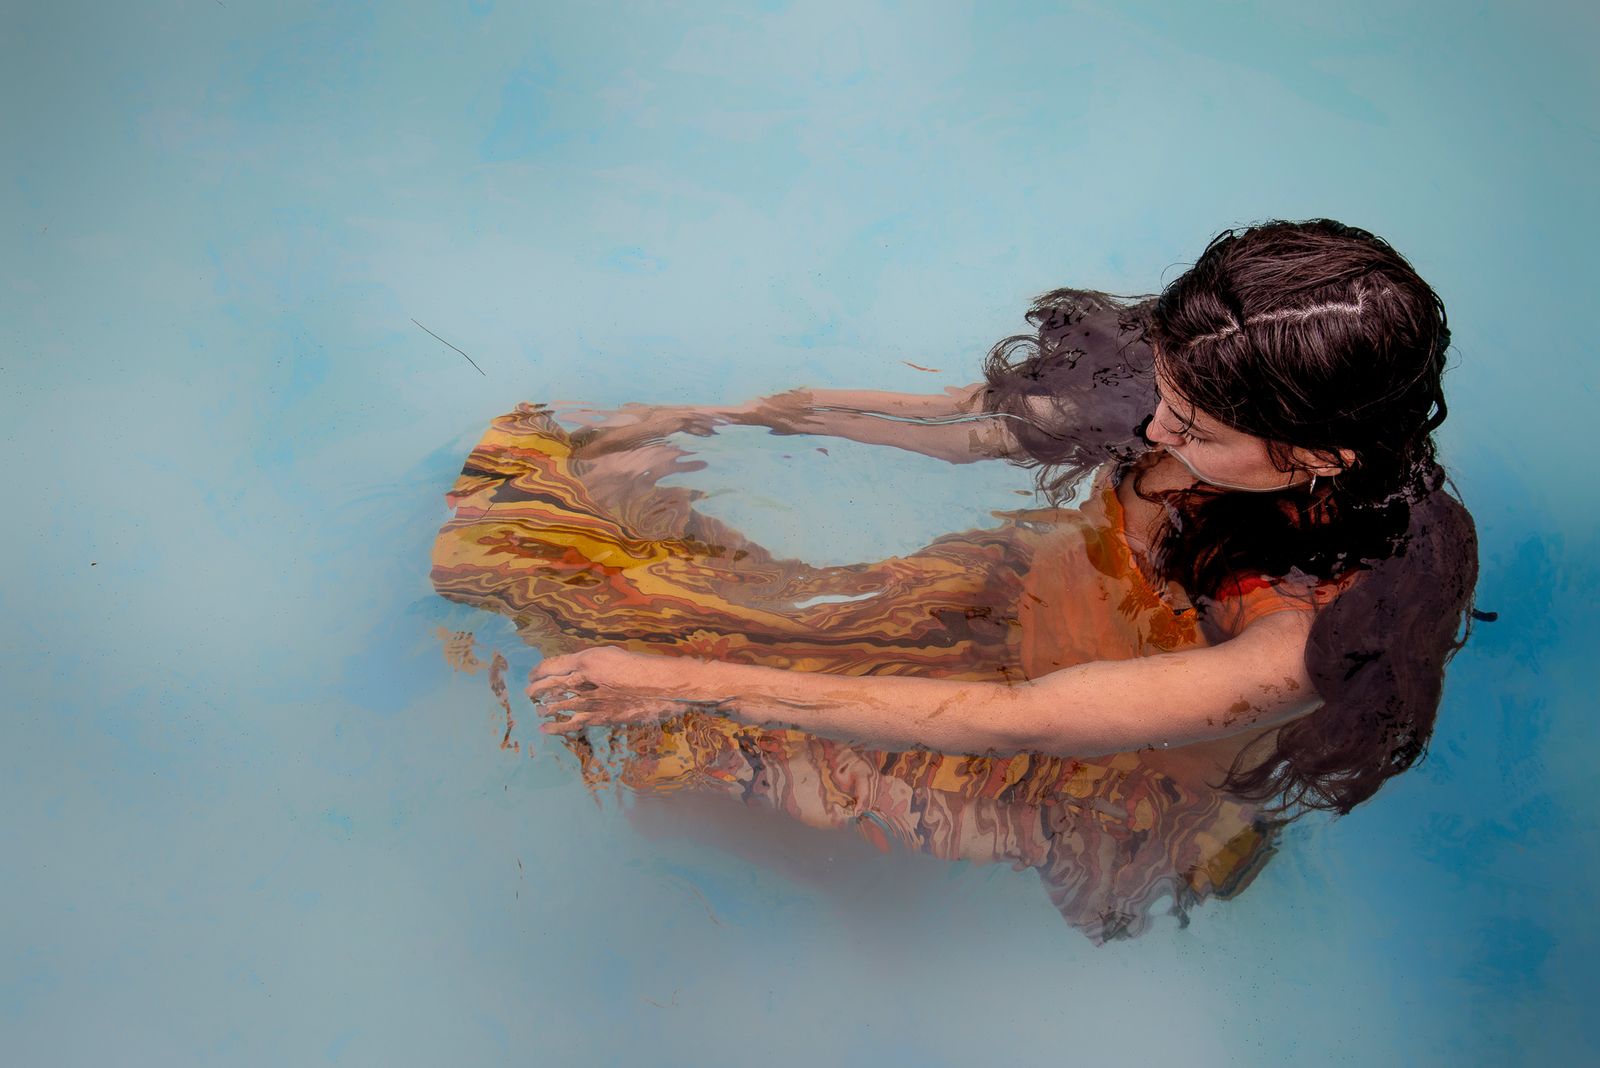 © Patricia Ackerman - Image from the The water dreams photography project